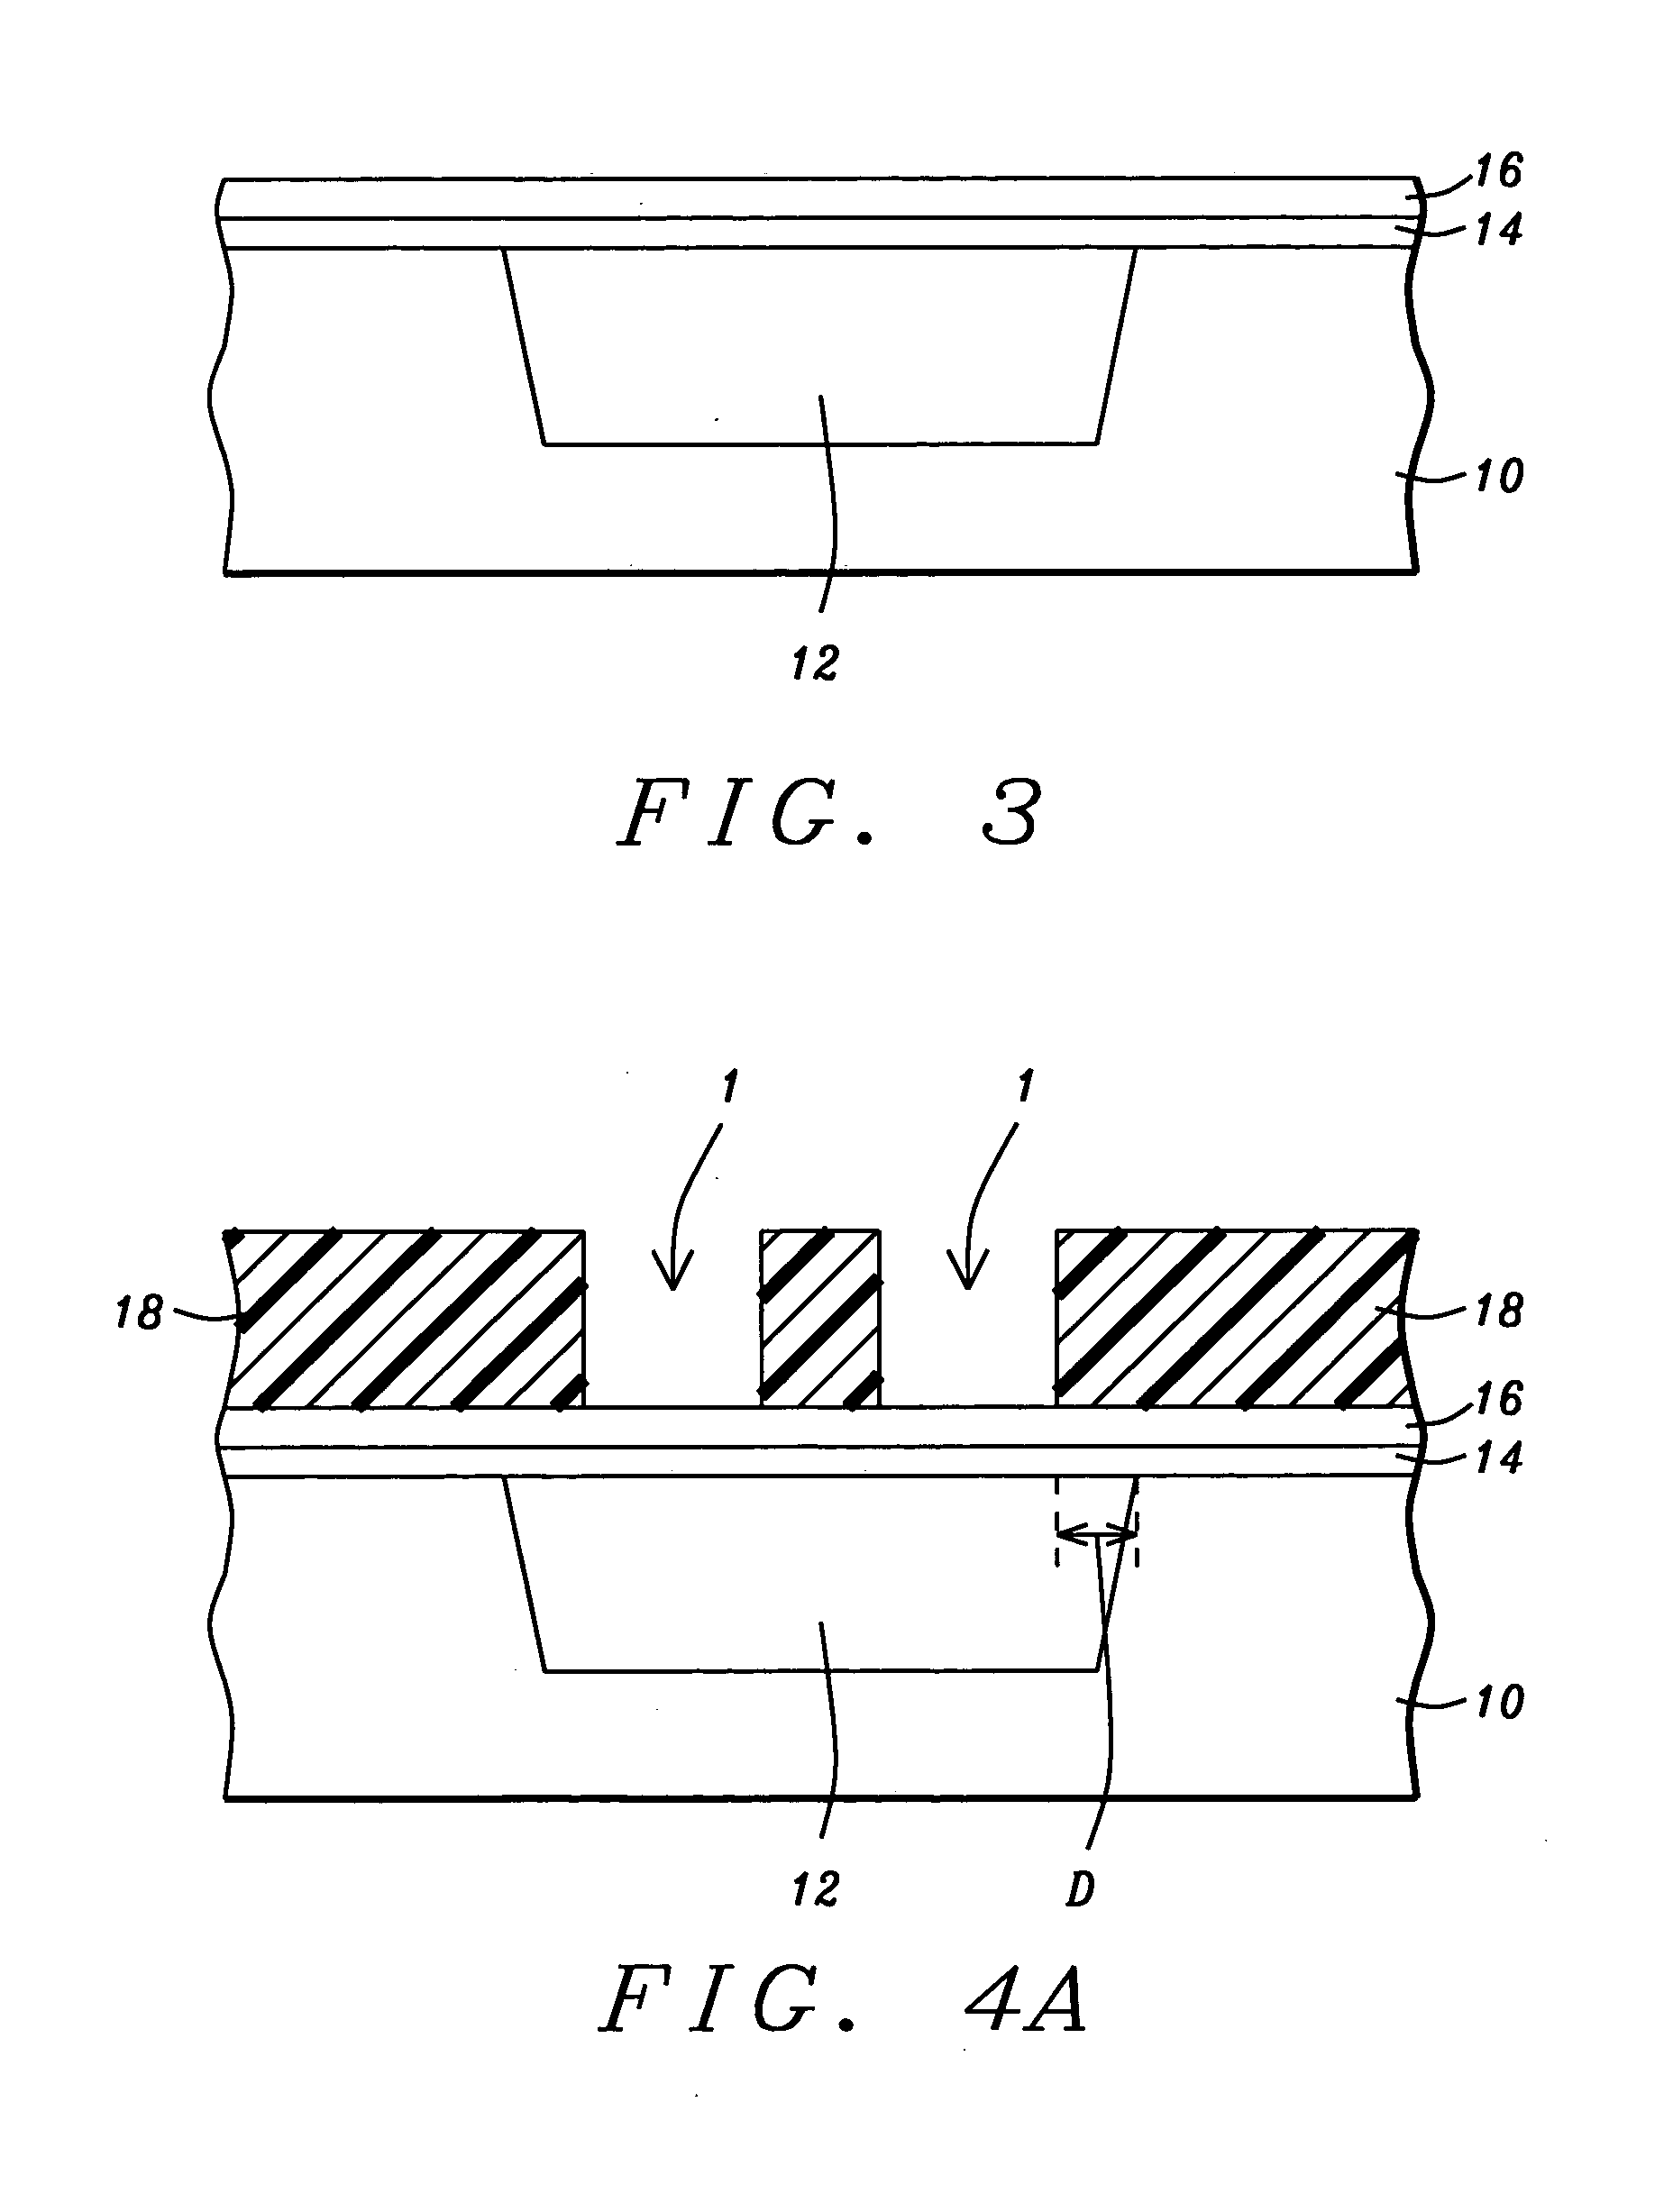 Novel random access memory (RAM) capacitor in shallow trench isolation with improved electrical isolation to overlying gate electrodes